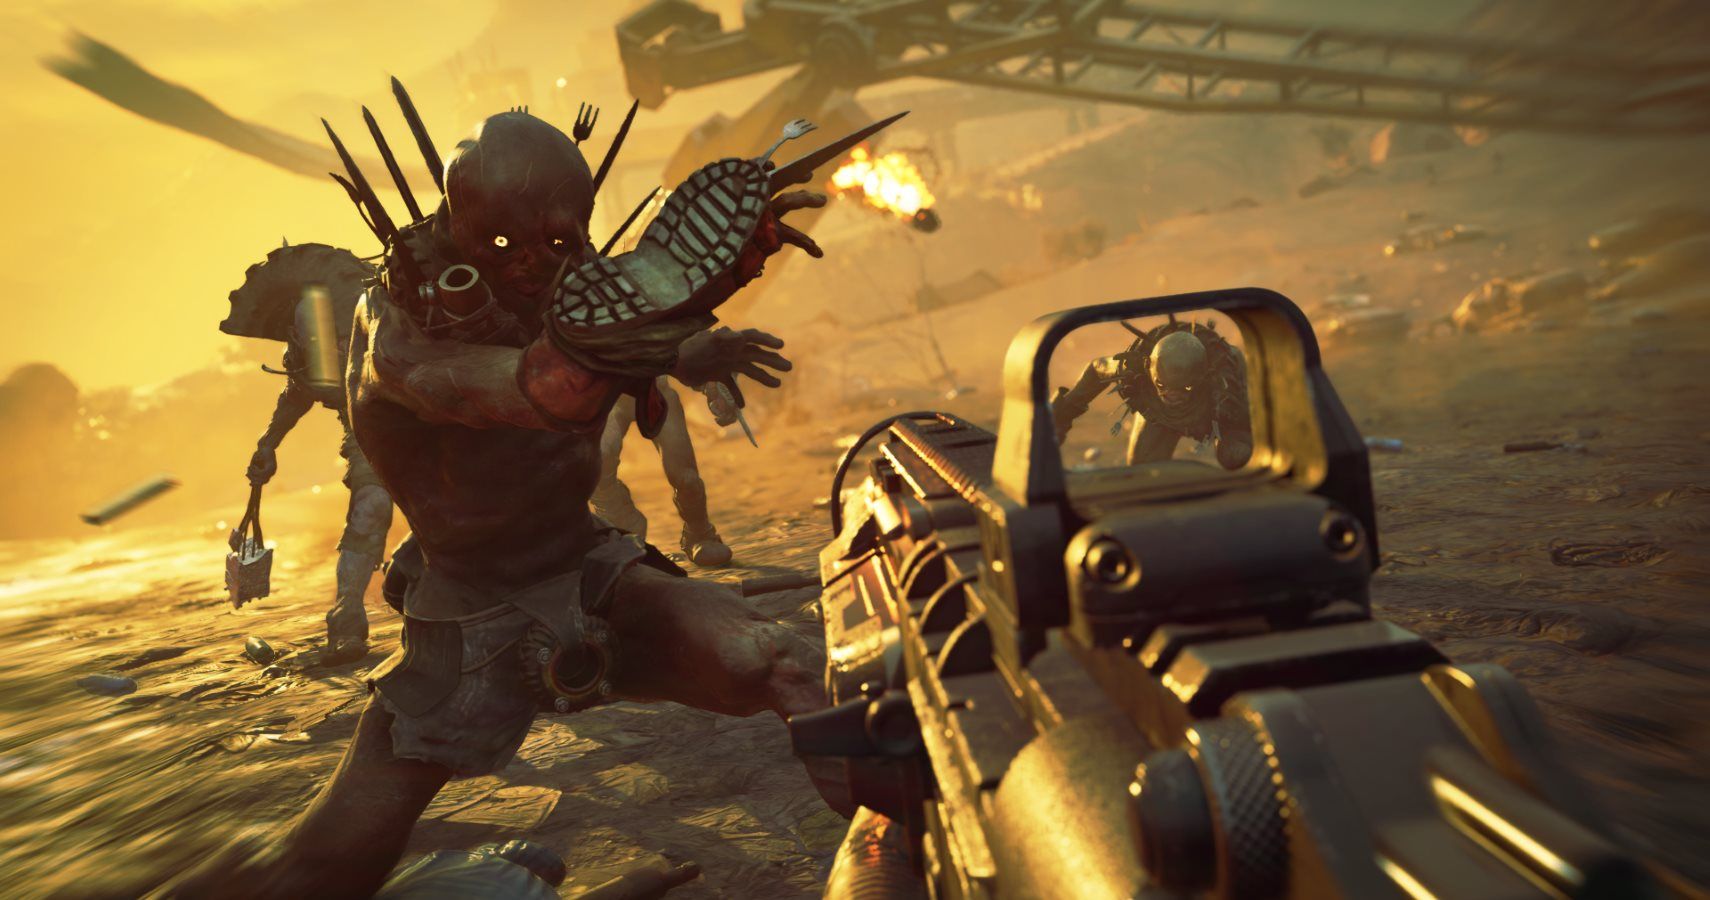 Rage 2 Developers Insist The Game Will Not Have Loading Screens